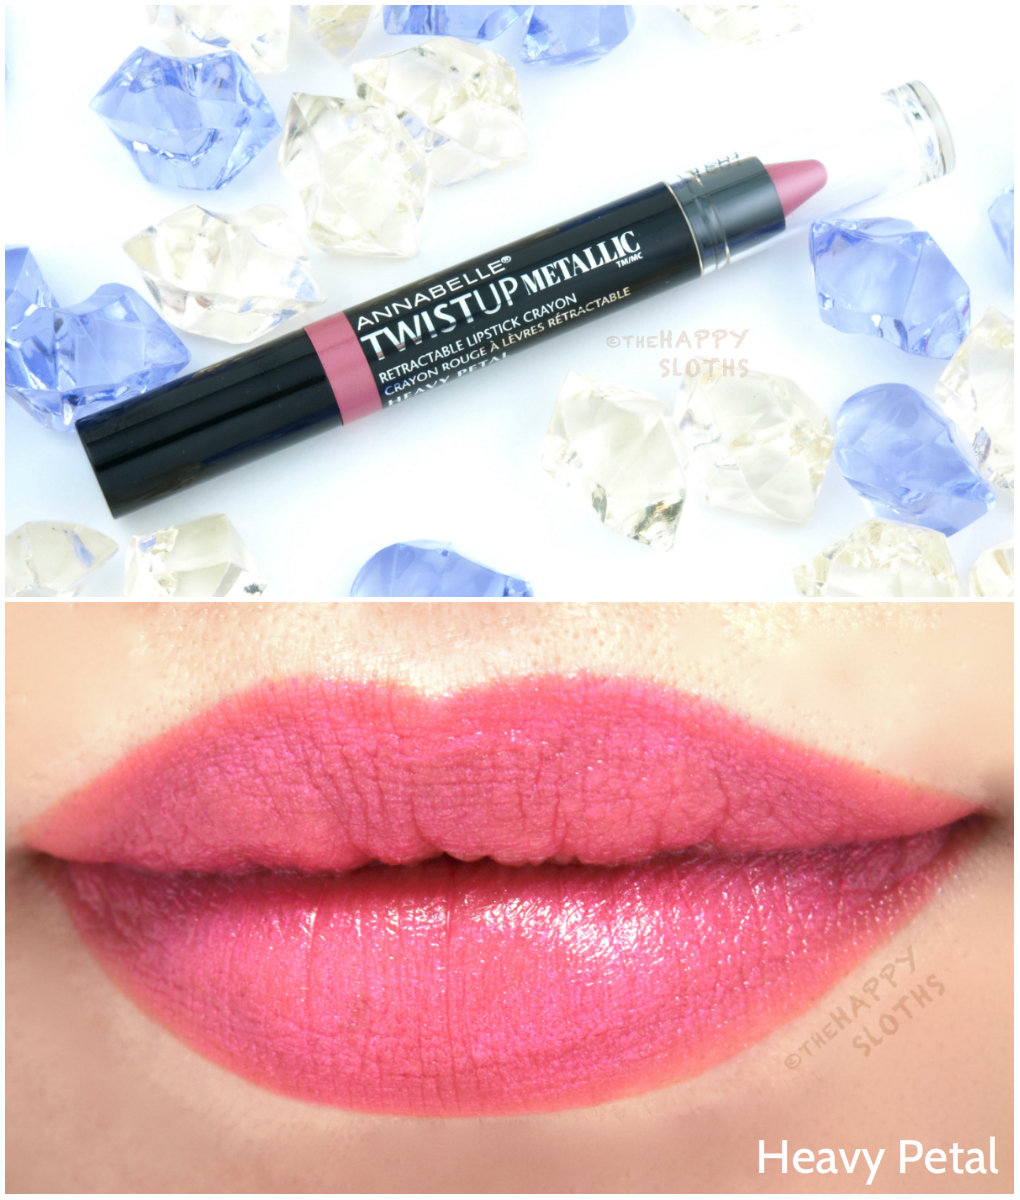 Annabelle TwistUp Metallic Retractable Lipstick Crayon: Review and ...